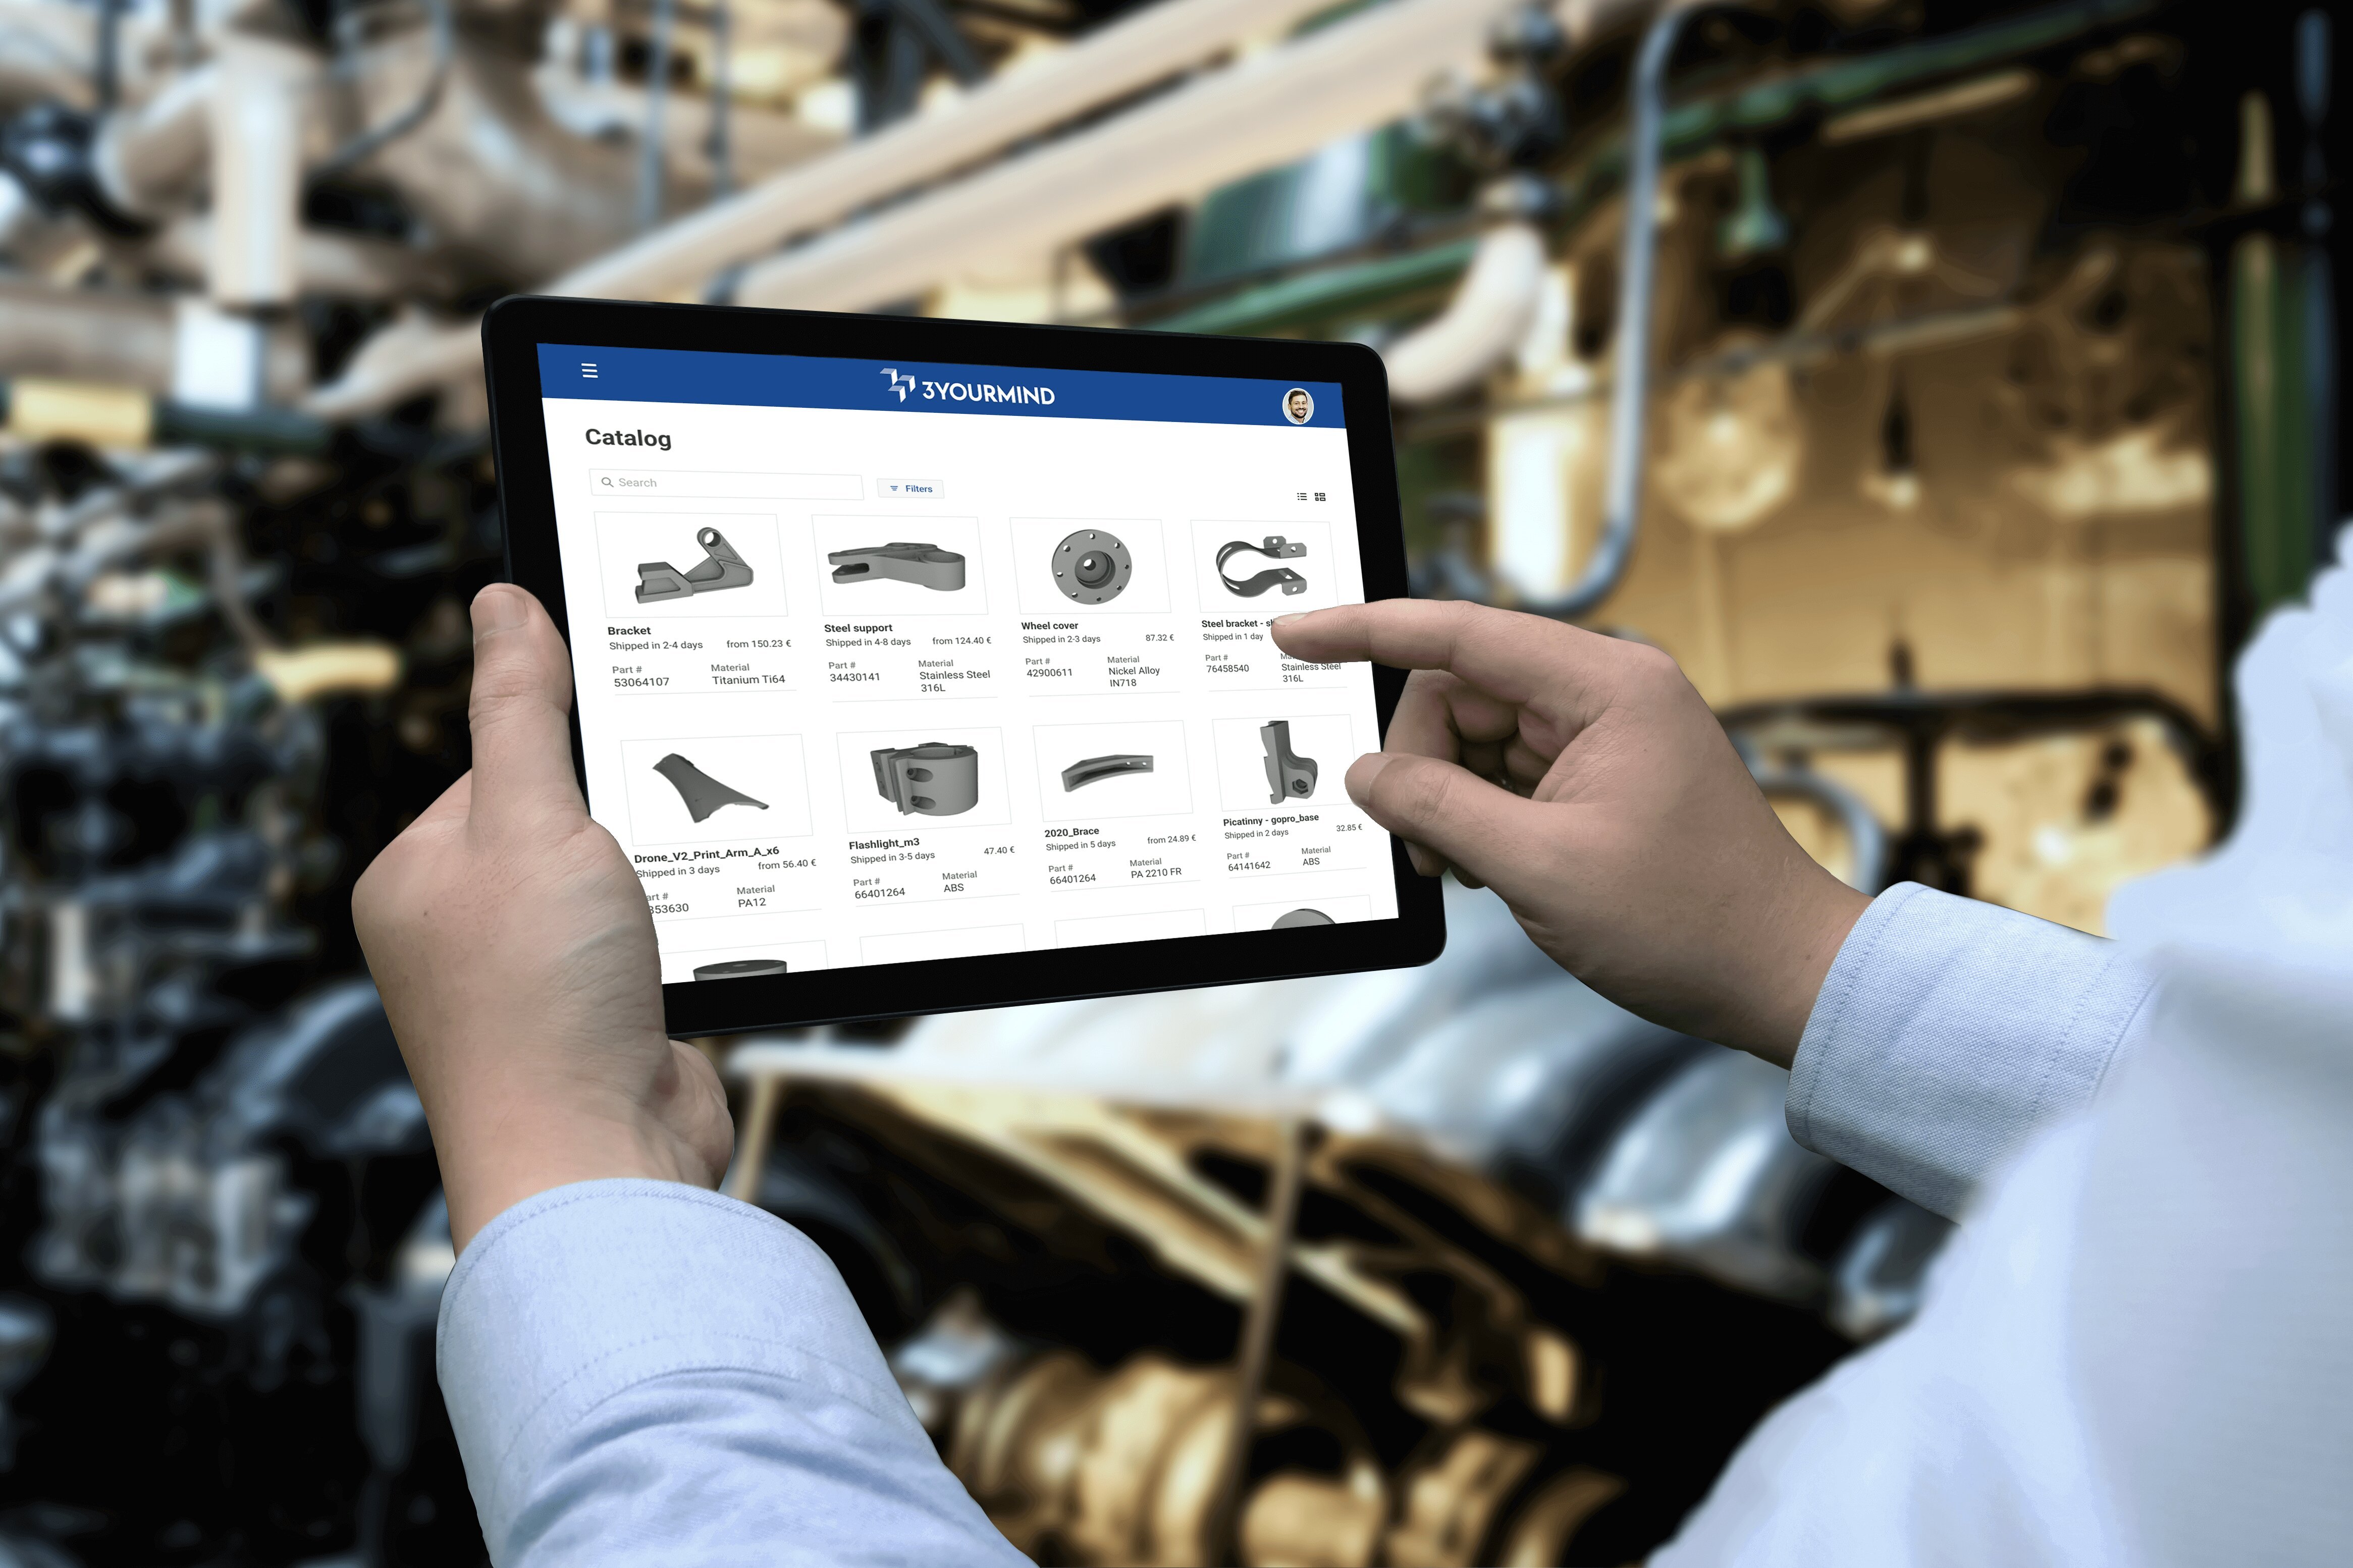 Man in factory looking at tablet with 3YOURMIND digital inventory software features